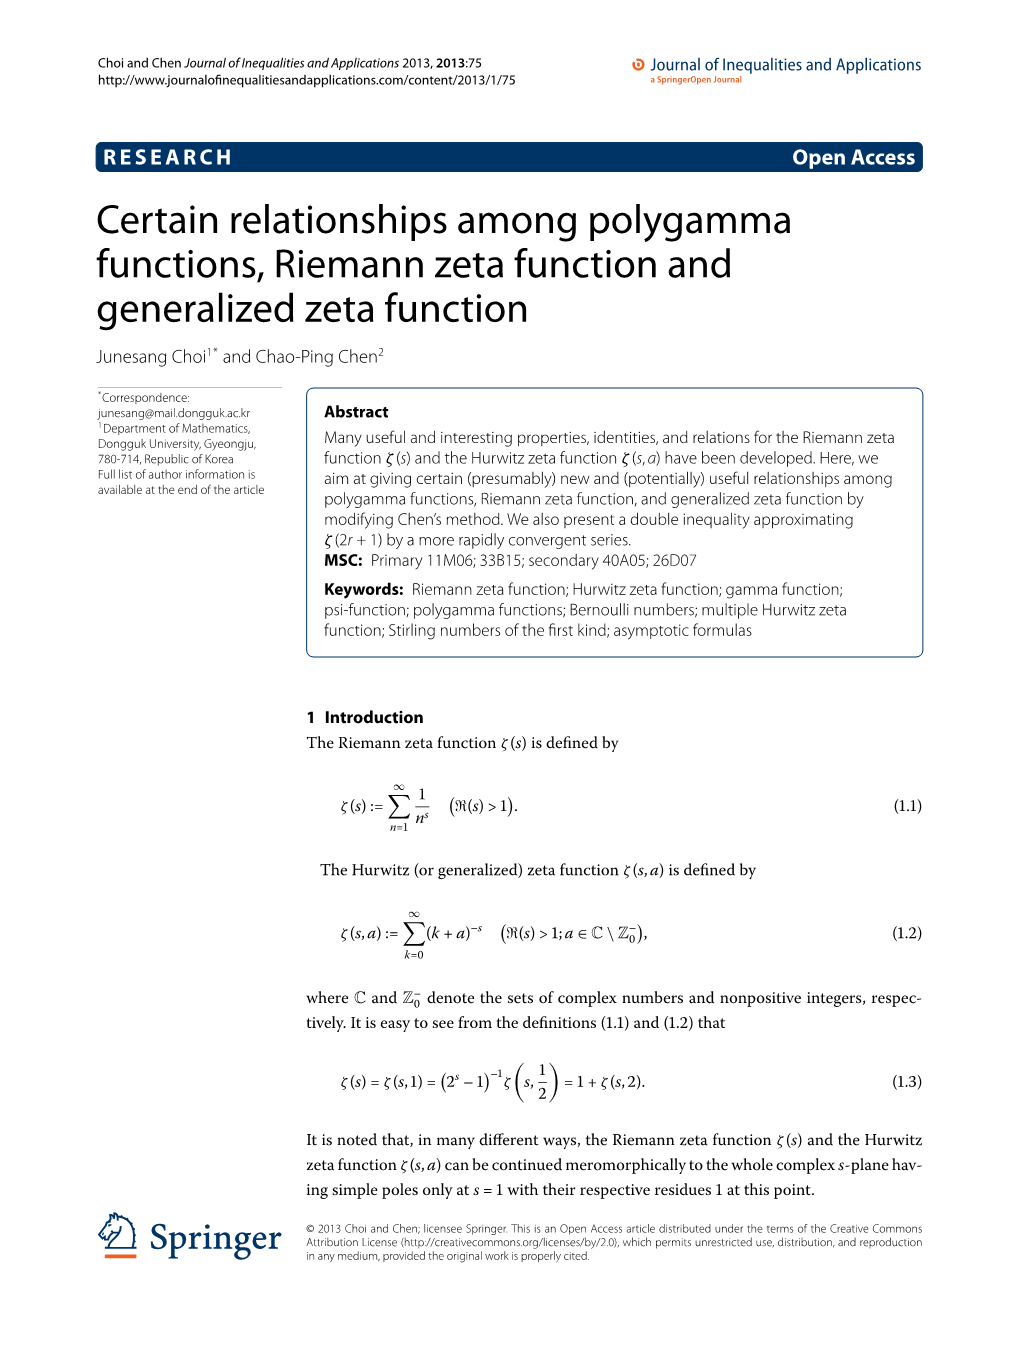 Certain Relationships Among Polygamma Functions, Riemann Zeta Function and Generalized Zeta Function Junesang Choi1* and Chao-Ping Chen2